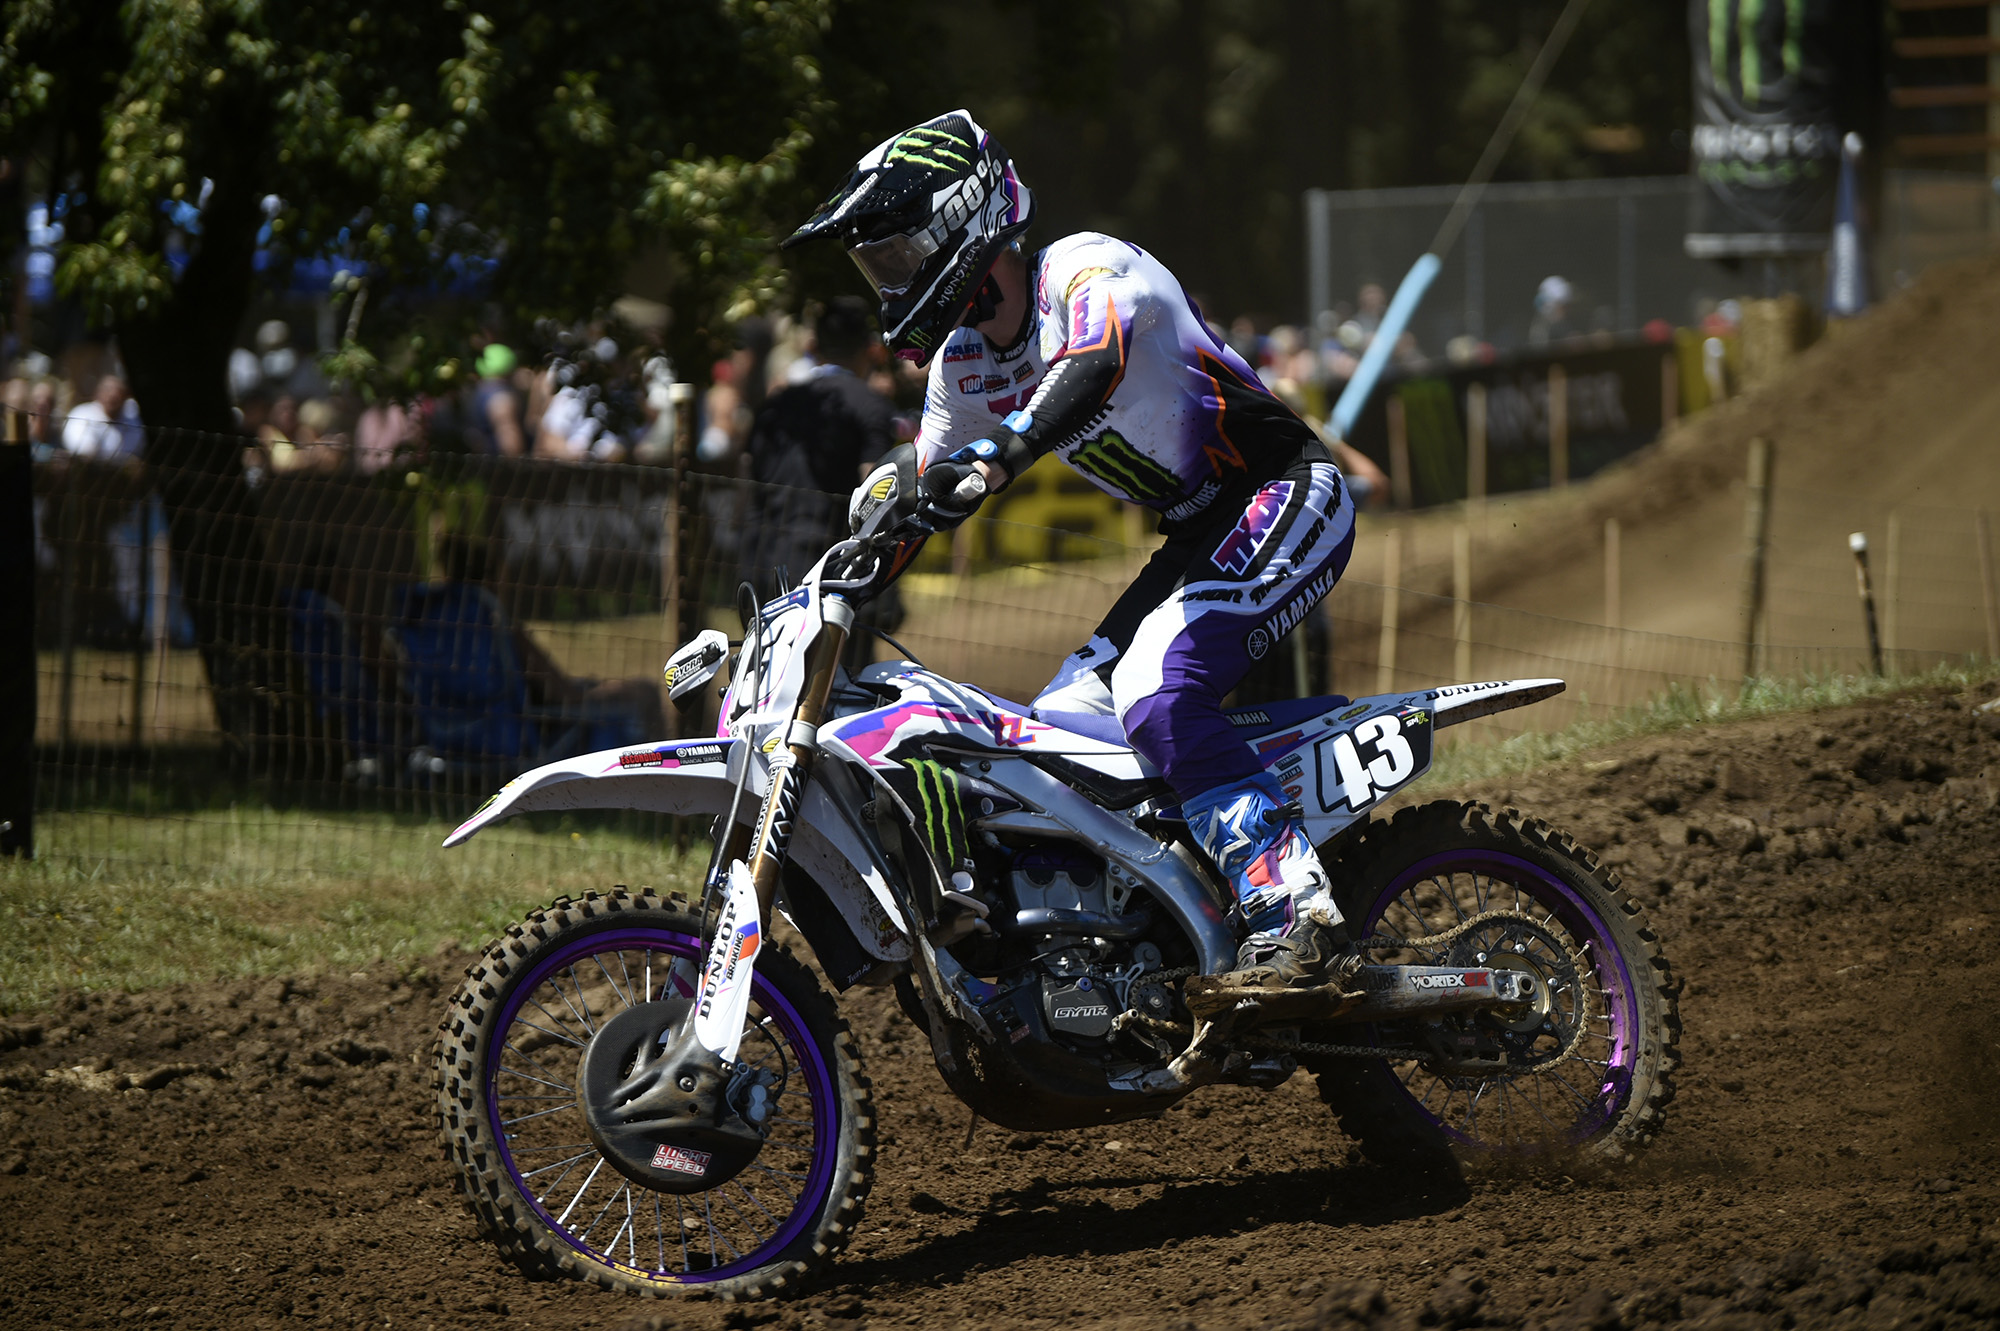 Levi Kitchen, from Washougal, does a practice run on Friday, July 21, 2023, in preparation of Saturday’s Washougal National Pro Motocross event at Washougal MX Park. Kitchen will race at Washougal for the first time since 2019 and for the first time as pro motocross rider in Saturday’s 250 Class event.